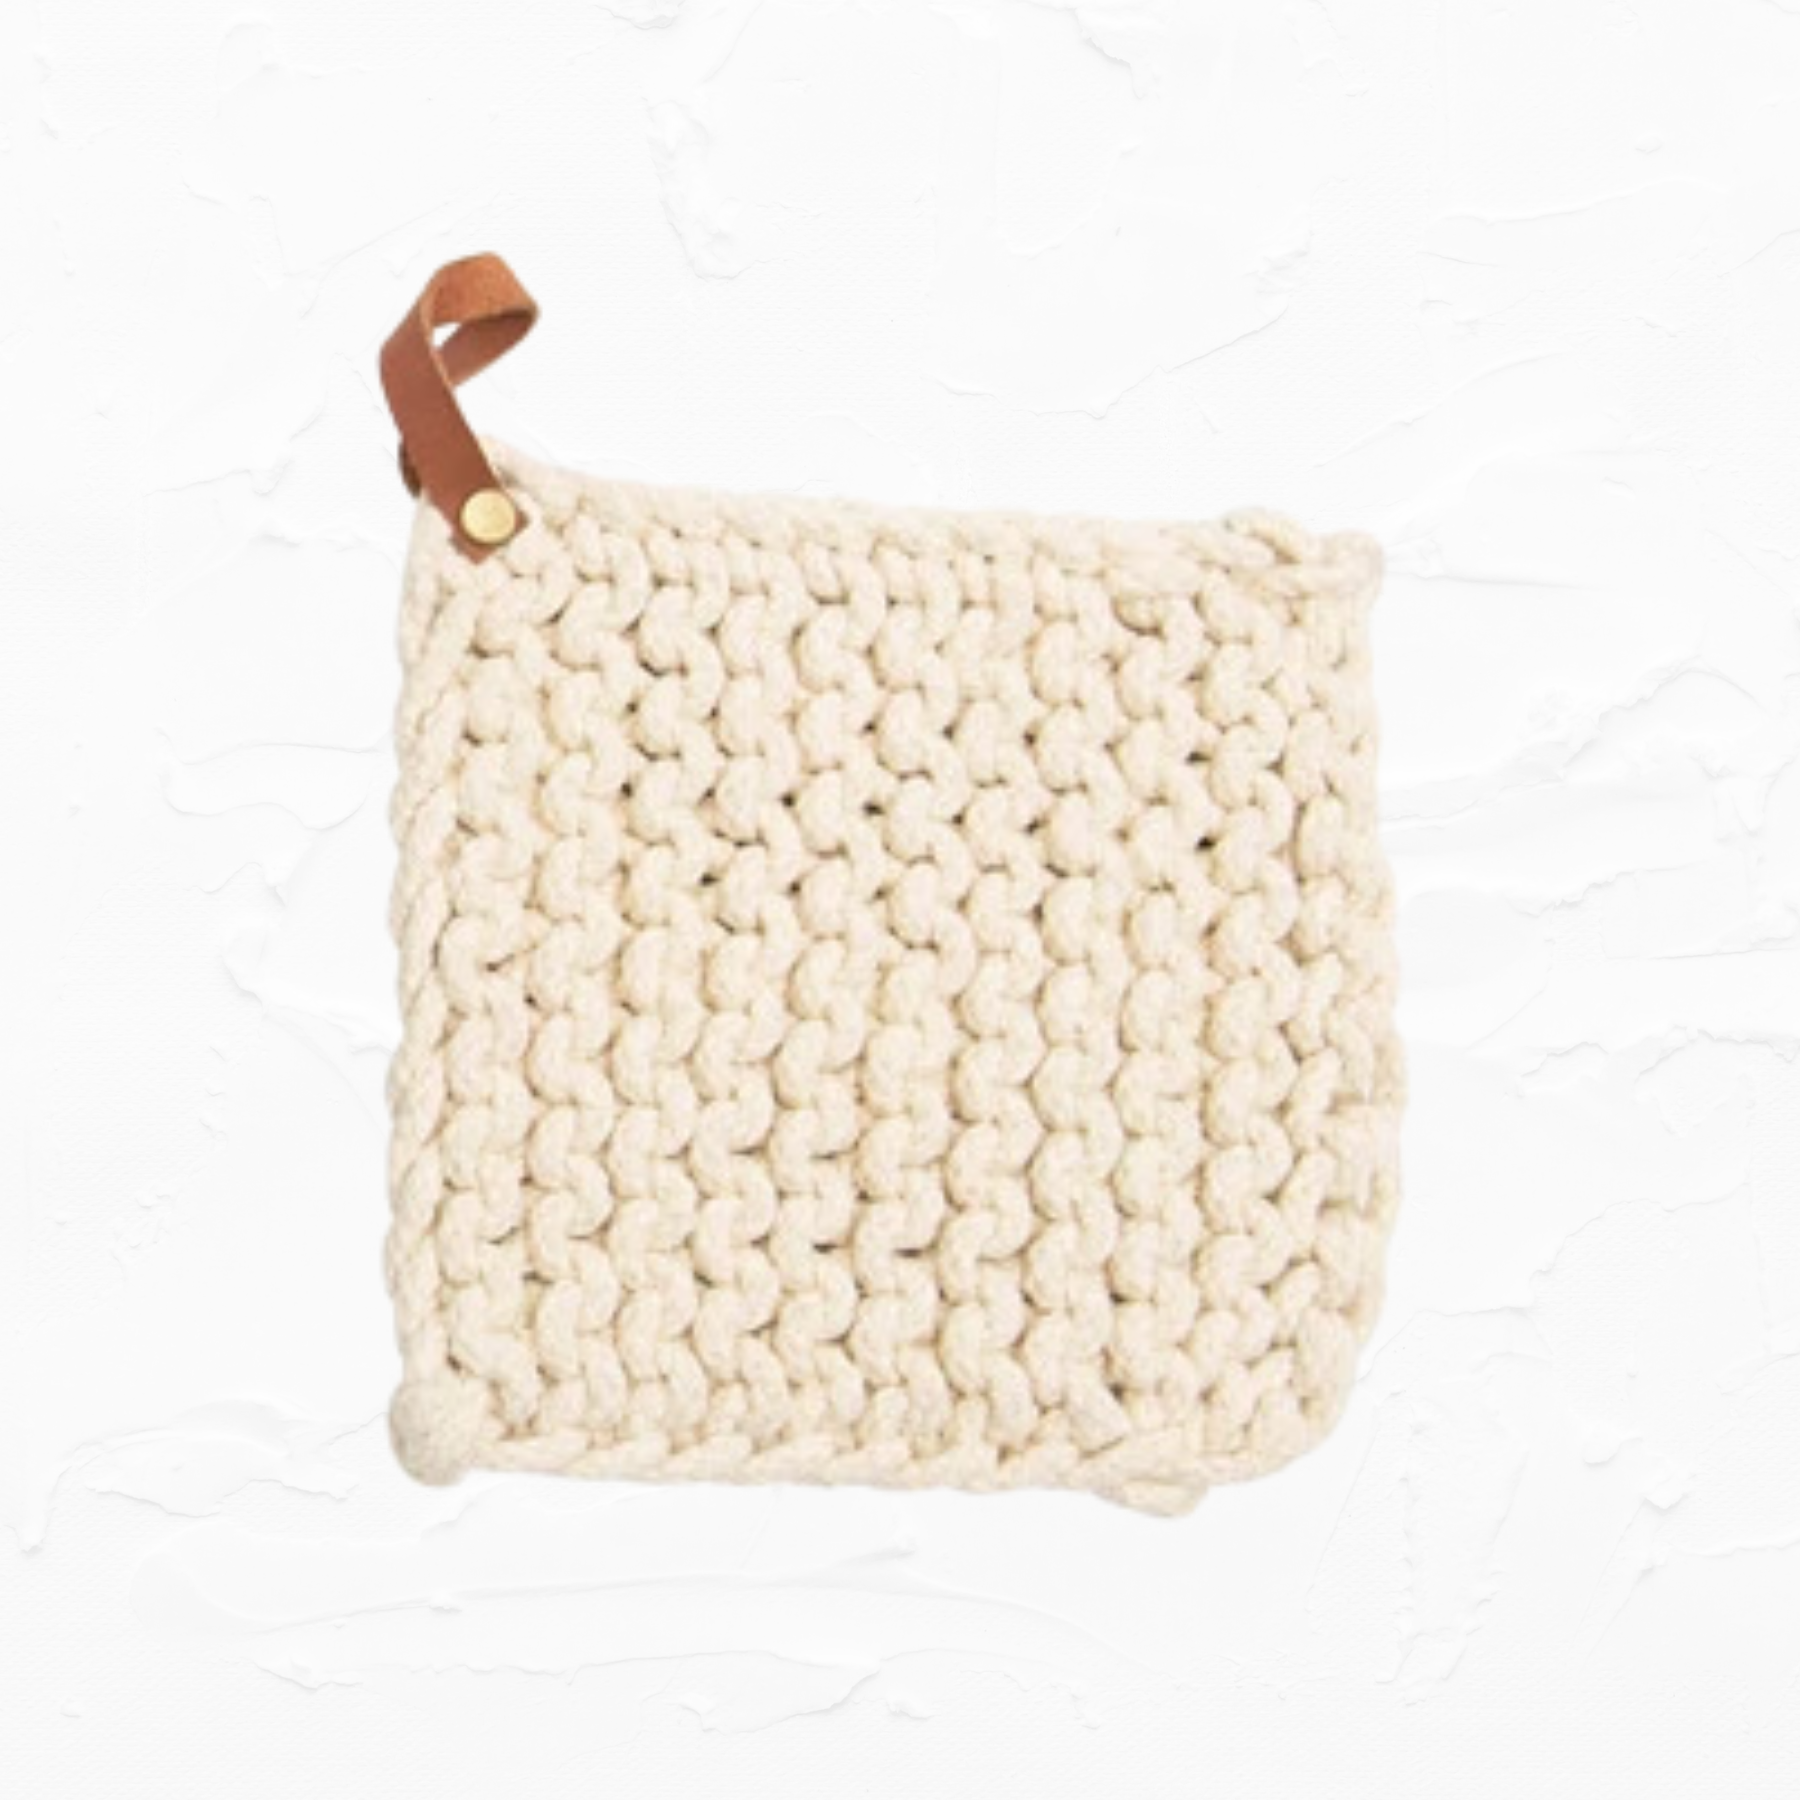 Crocheted Pot Holder with Leather Loop - Natural